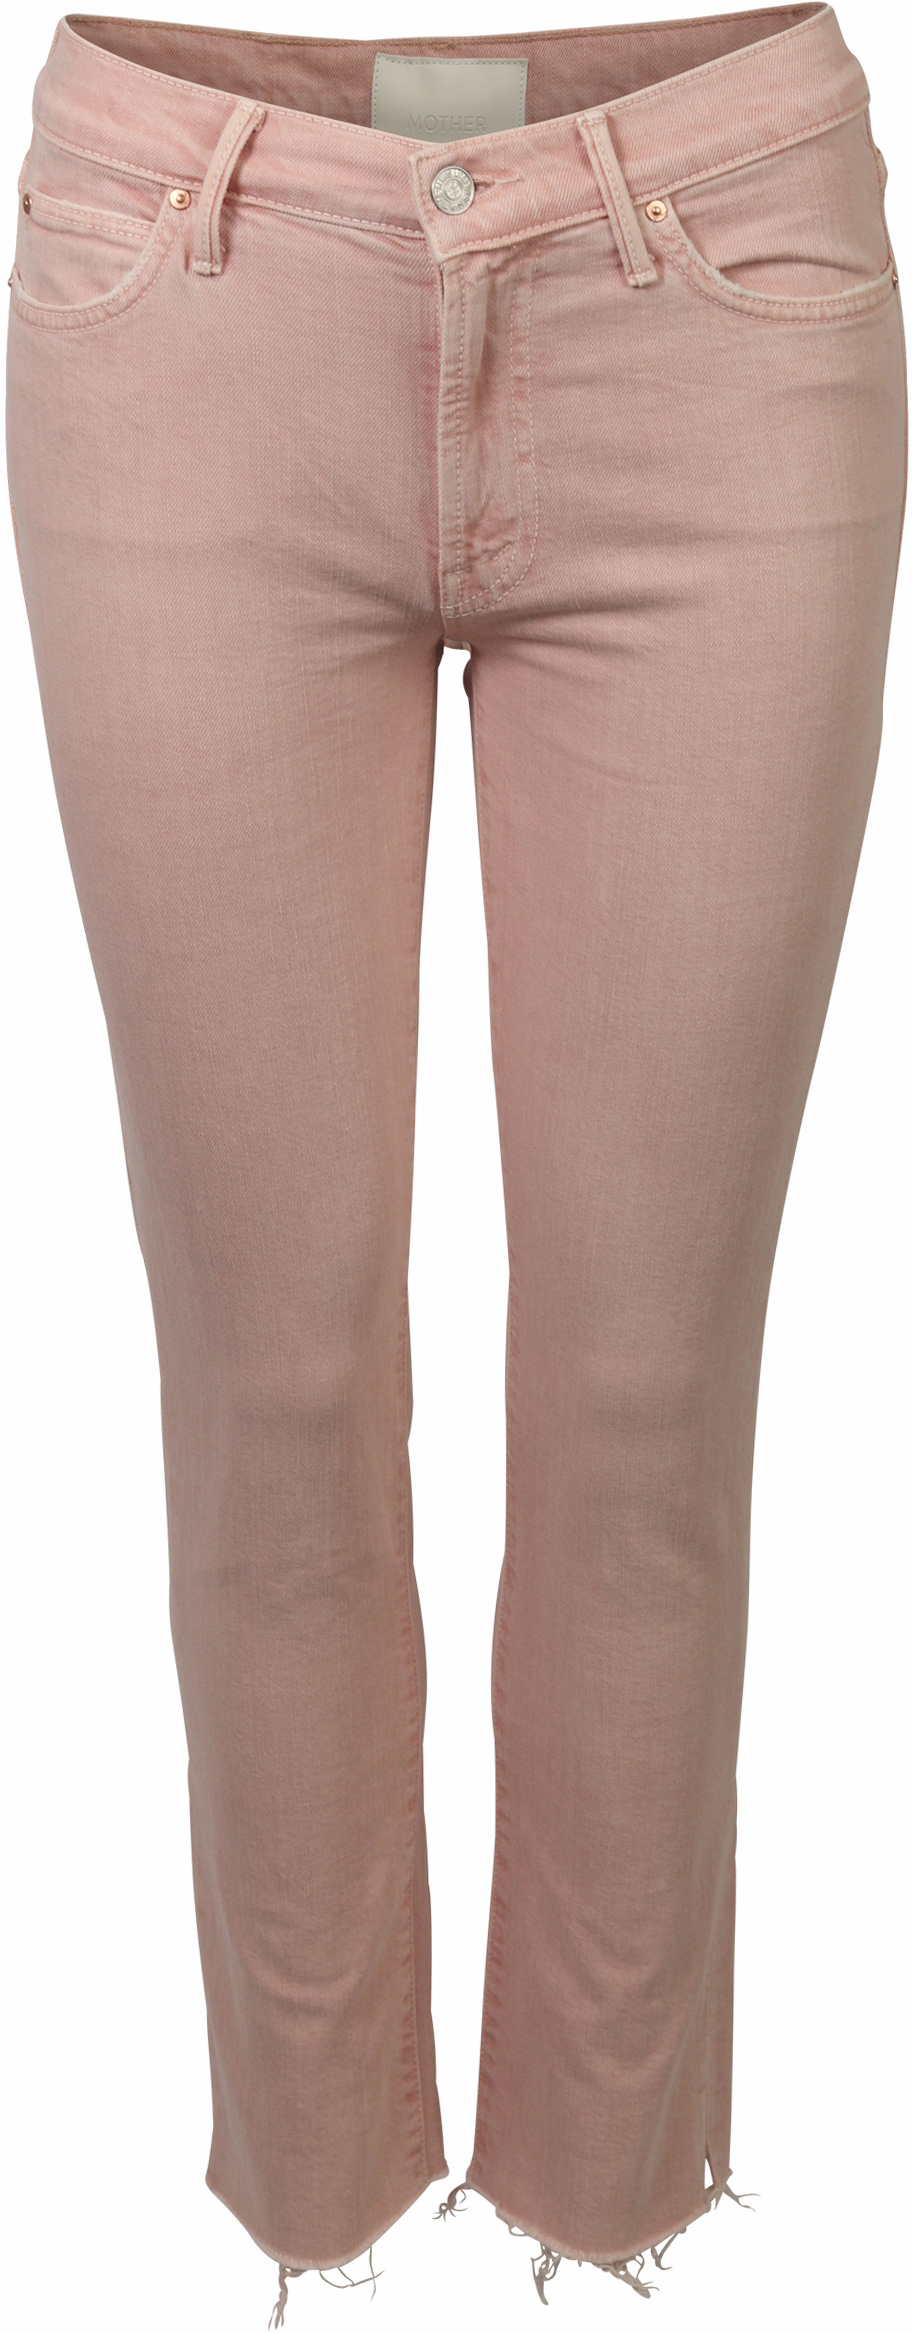 Mother Cropped Jeans Blush Pink